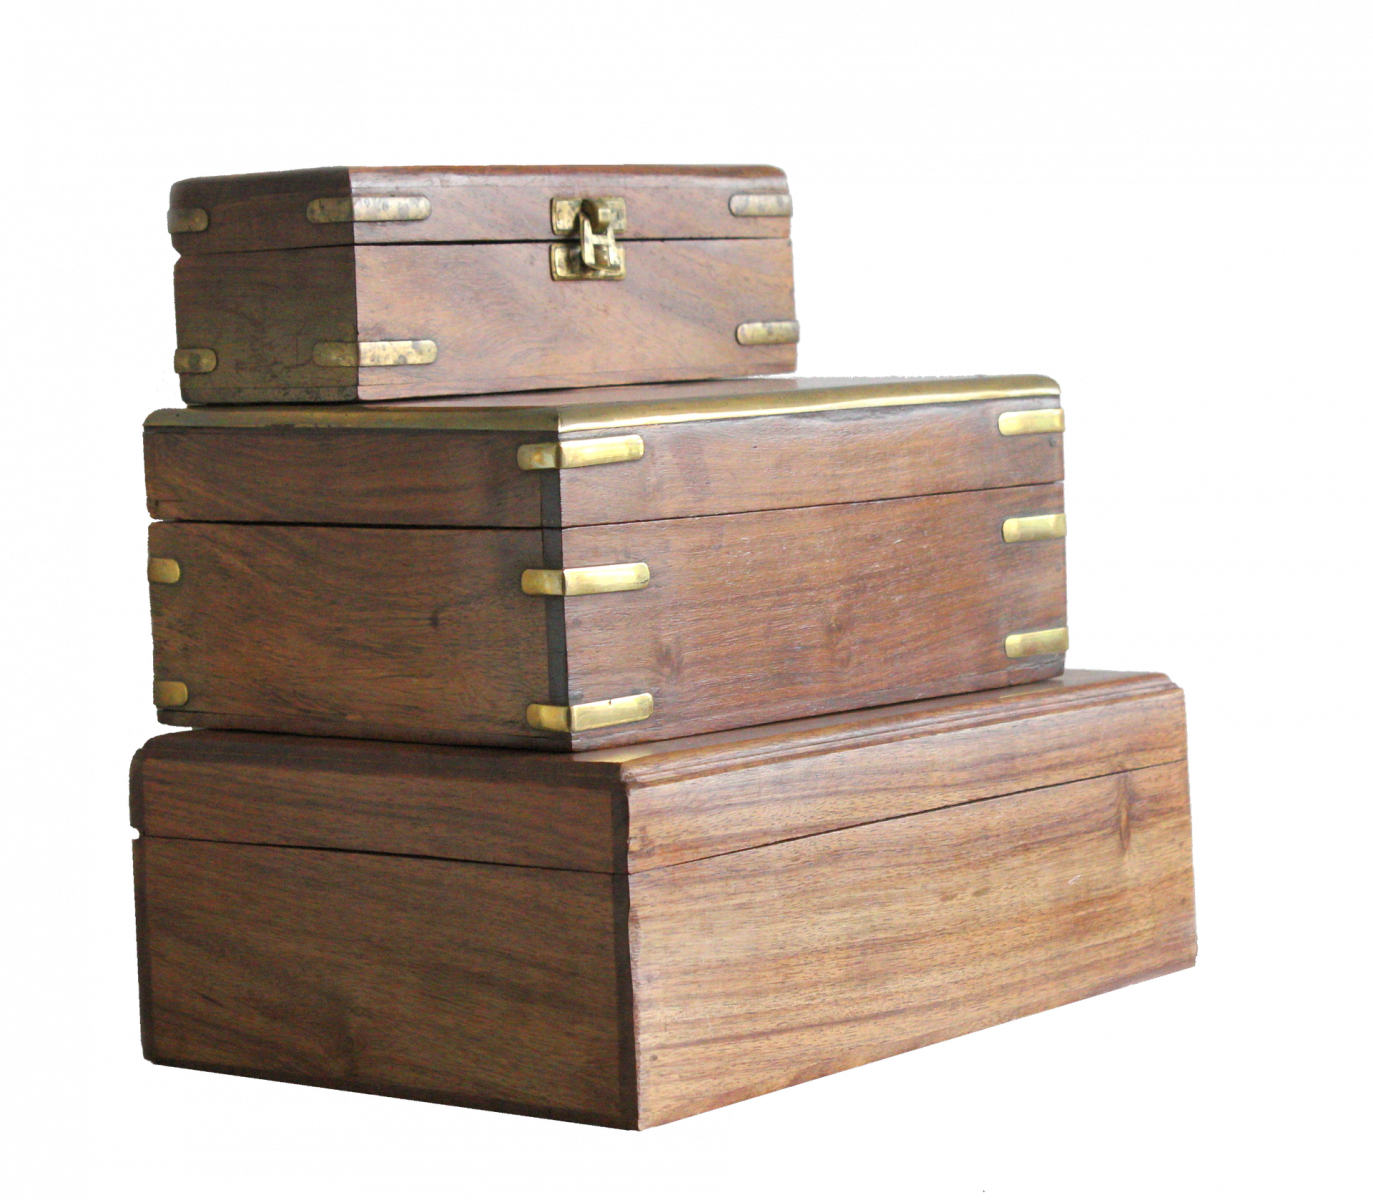 Three wooden chests stacked on top of each other